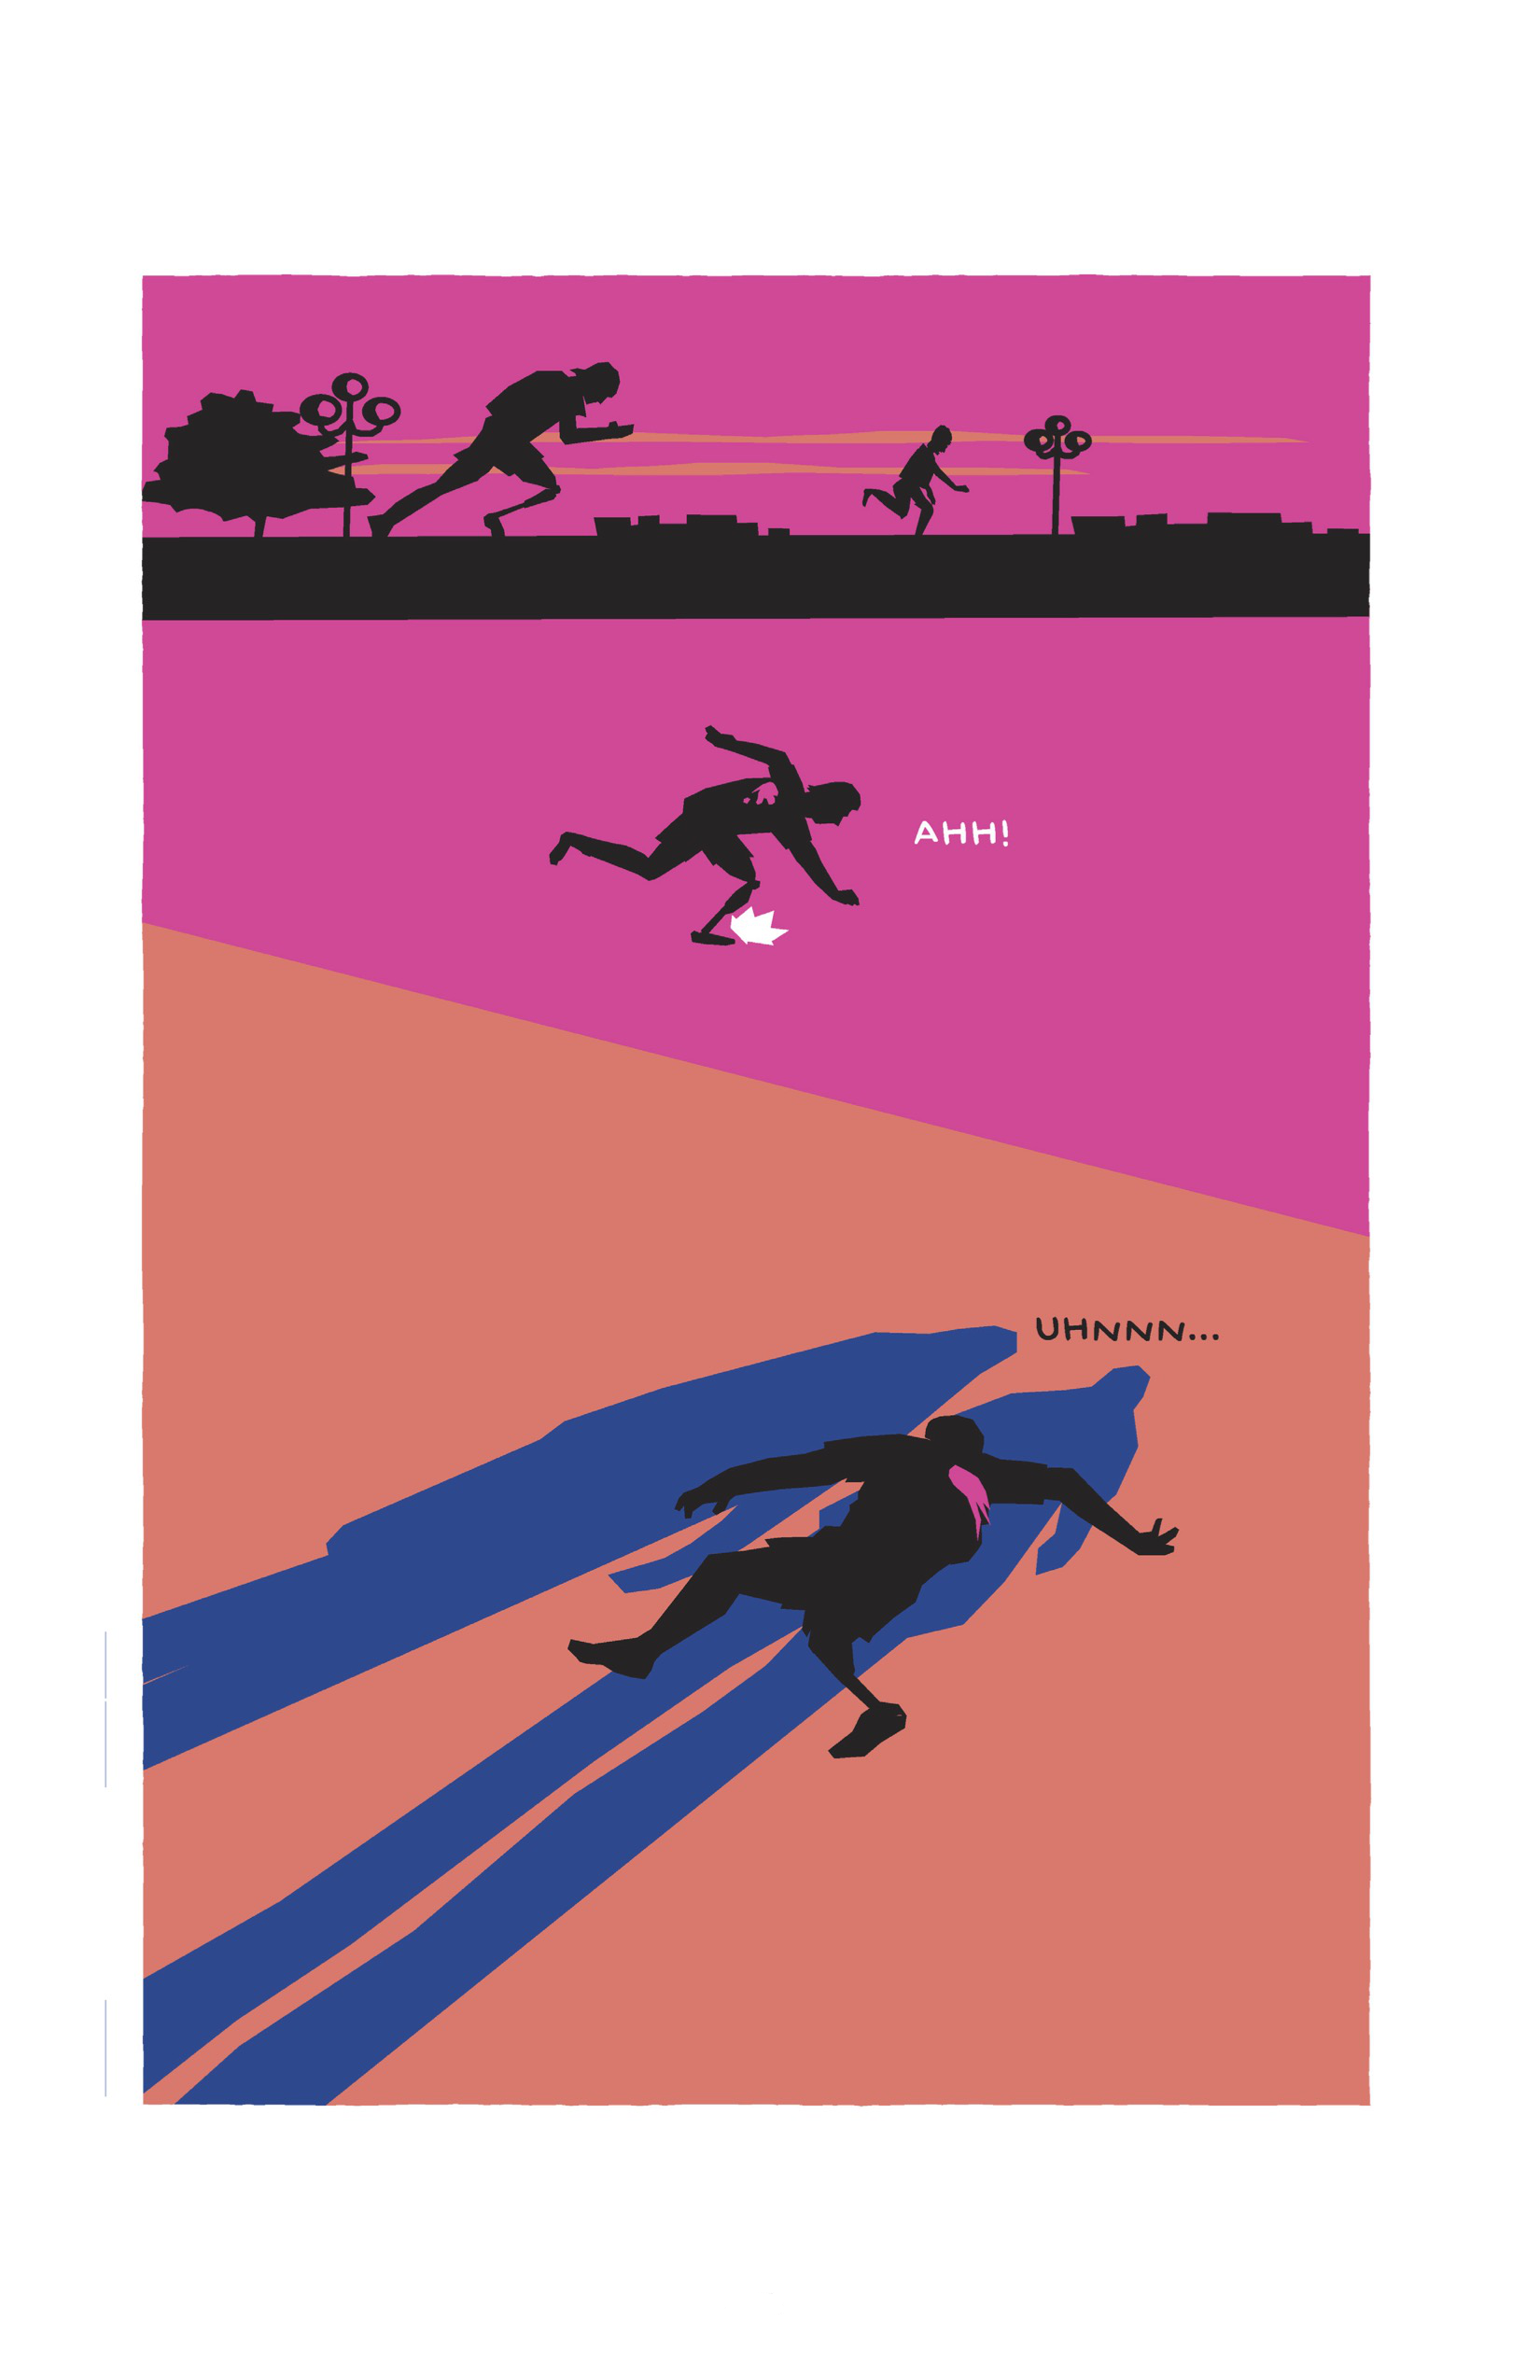 Now outside, Guy and his companion are sprinting down the road, black silhouettes against the pink sun. 
Guy is then isolated in a wash of pink, falling over as he takes another bullet to the back and one that hits near his foot. He yells out, “AHH!”
Guy’s limp body is lying on the ground, limbs splayed out at disjointed angles. A pink, bloody bullet wound stands out against his black silhouetted body. He groans, “UHNNN…” Two long blue shadows stretch out over him as the two men look down at their work. The background of this section of the page is peach orange, rather than hot pink. 